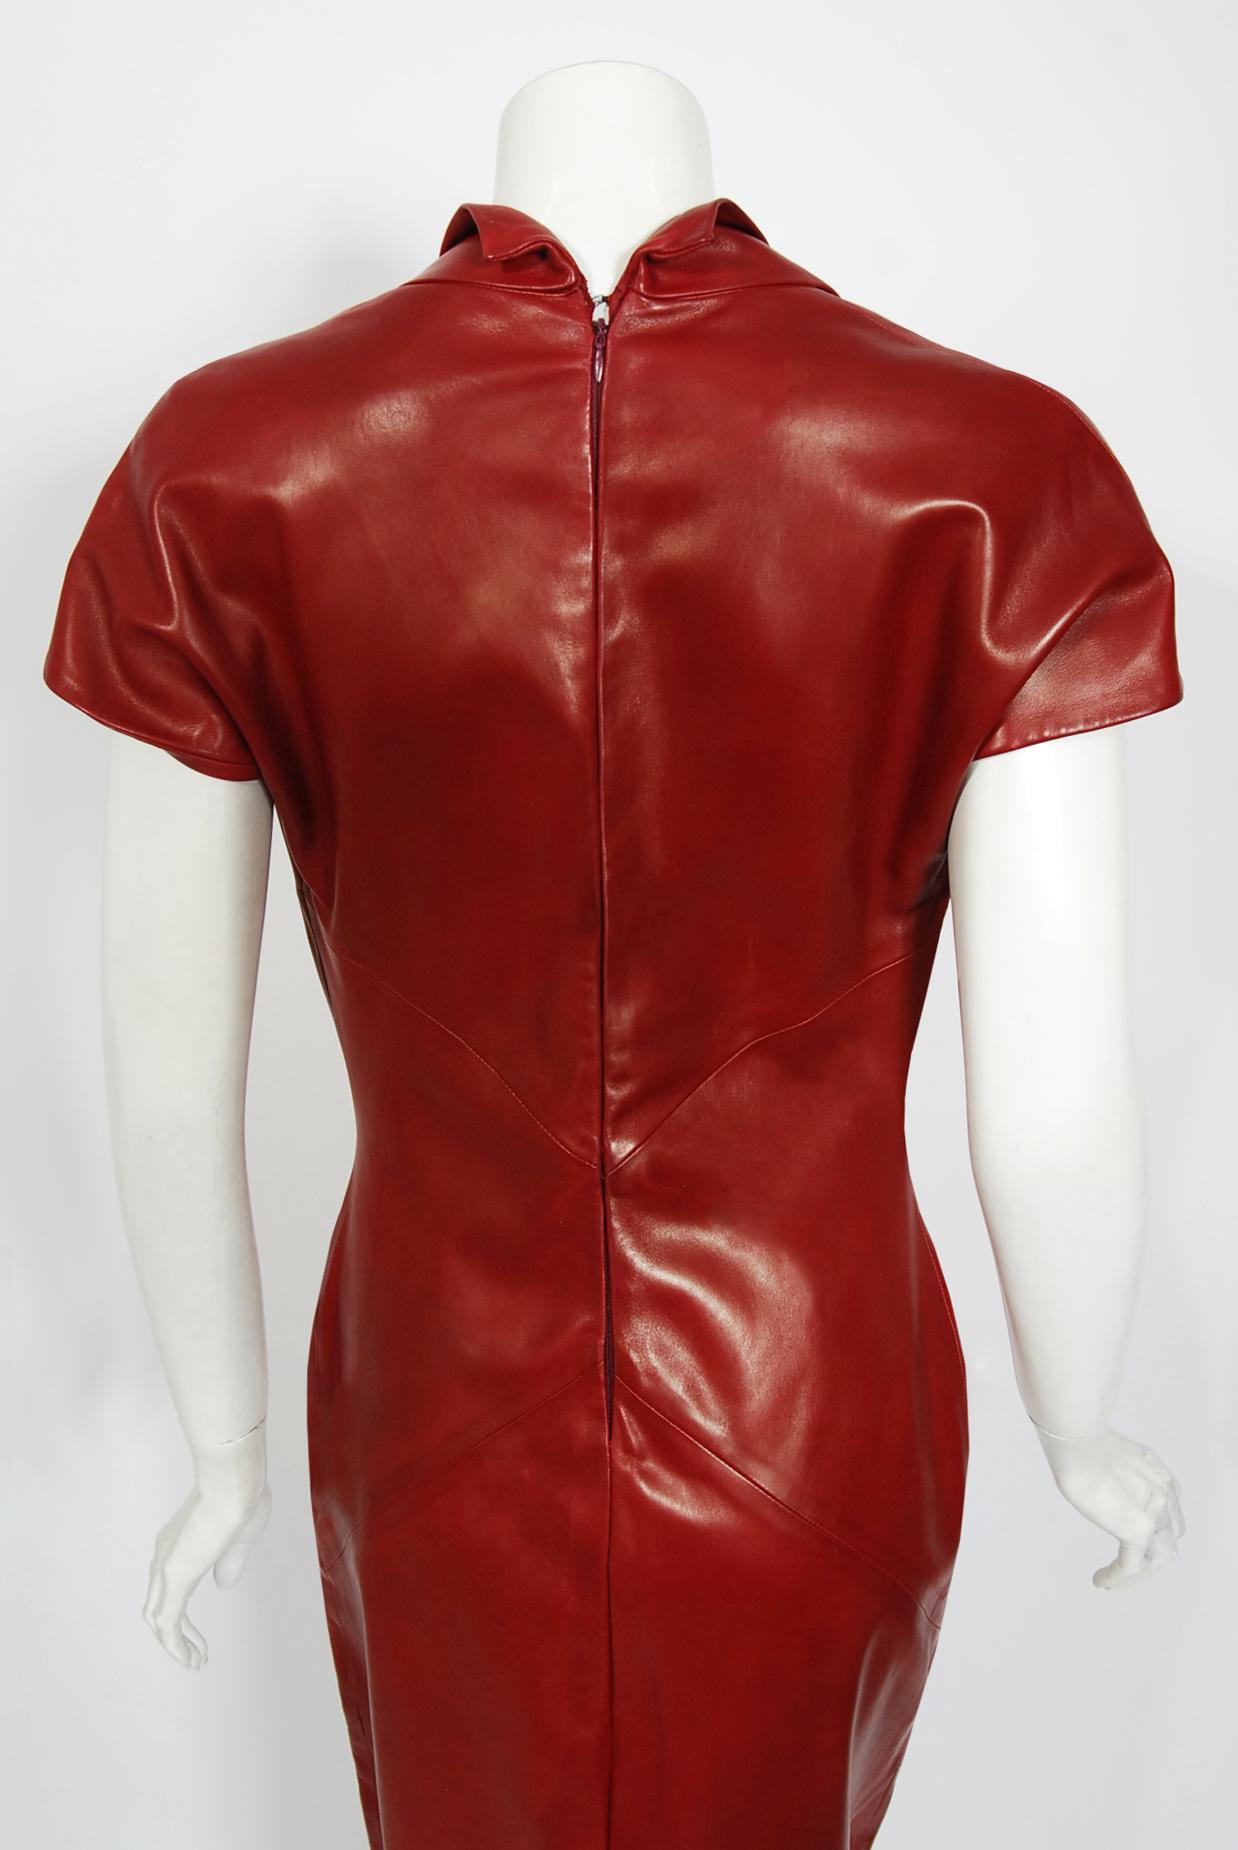 Vintage 1998 Alexander McQueen For Givenchy Runway Red Leather Low-Plunge Gown  2